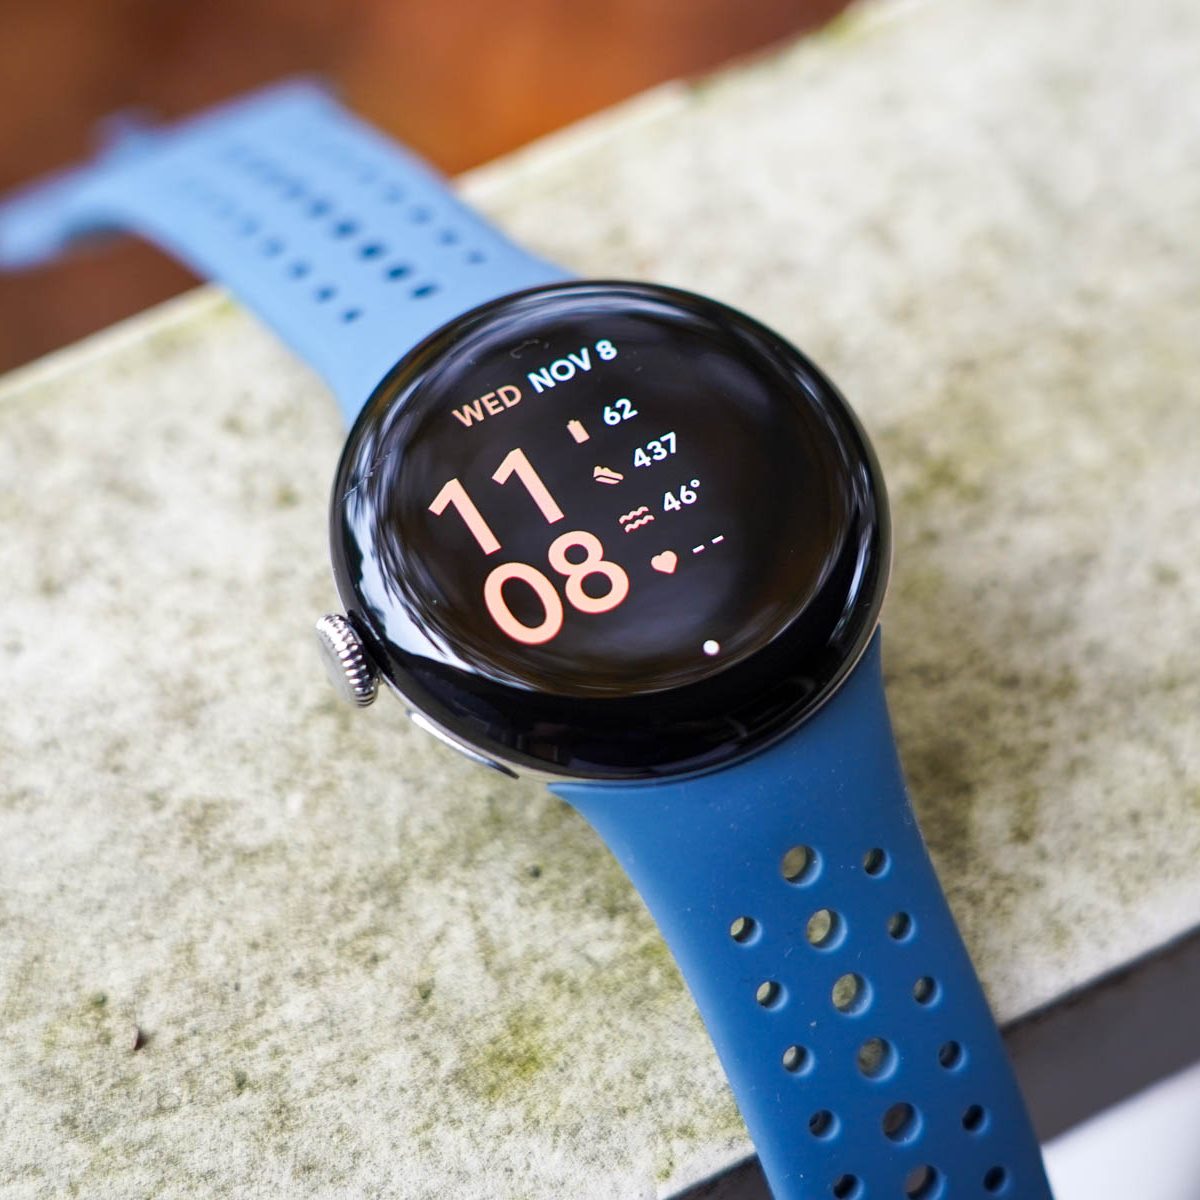 Google Adds Mail in Replacement Service for Pixel Watch 2